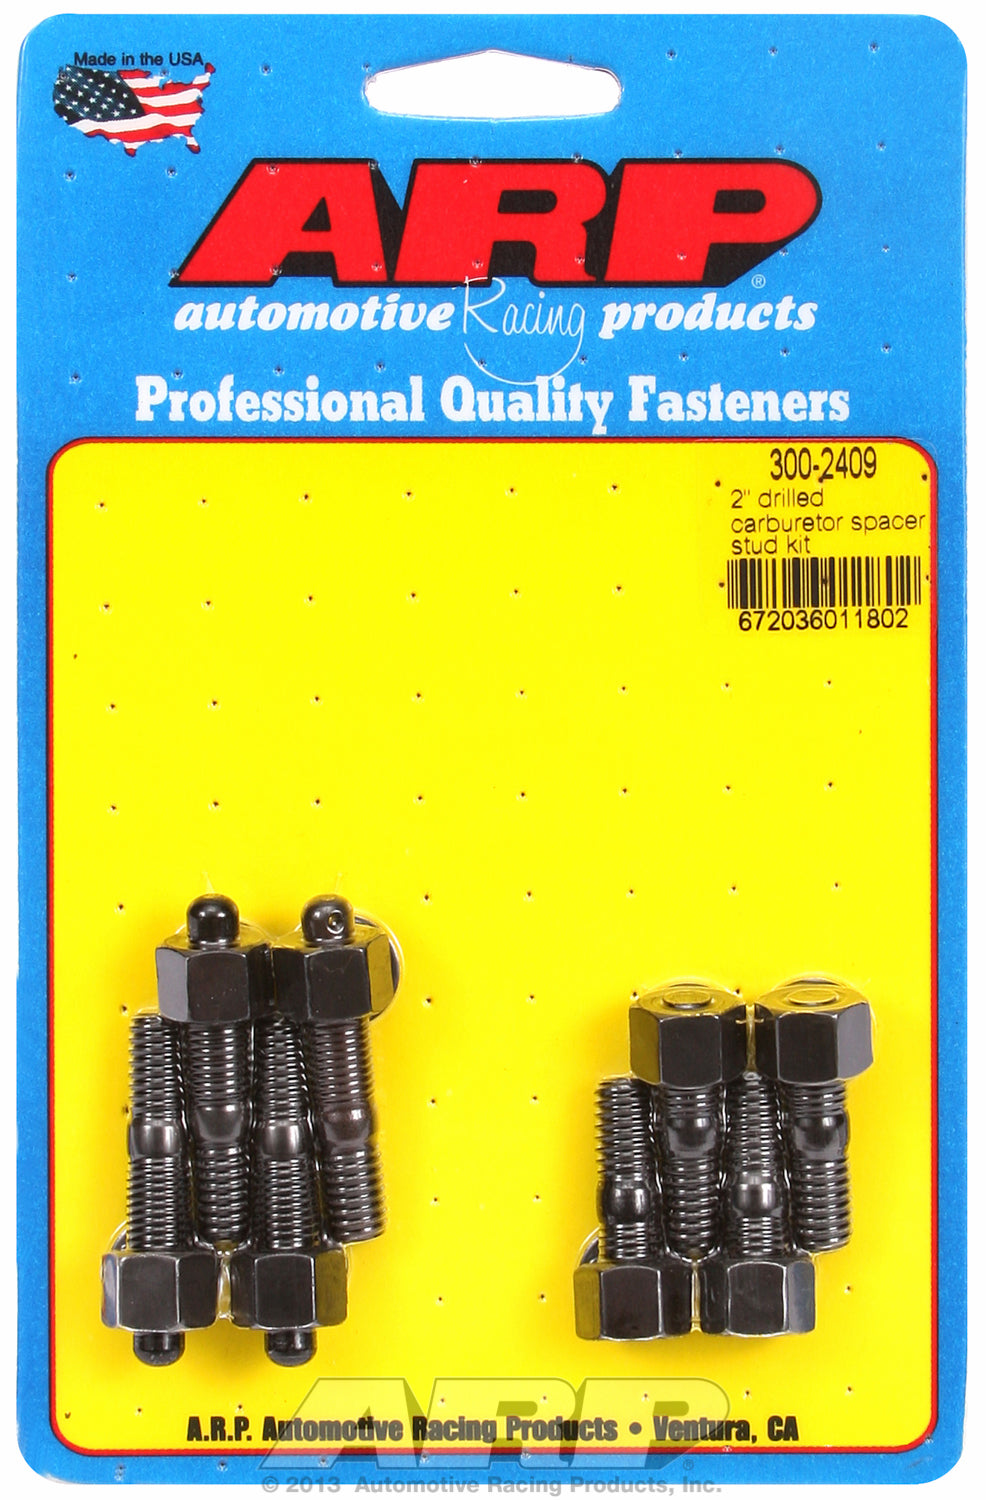 2˝ Moroso spacer (drilled for NASCAR wire seal) Carb Stud Kit 1.250* (4) & 1.700 (1) & 1.700 (1)in OA